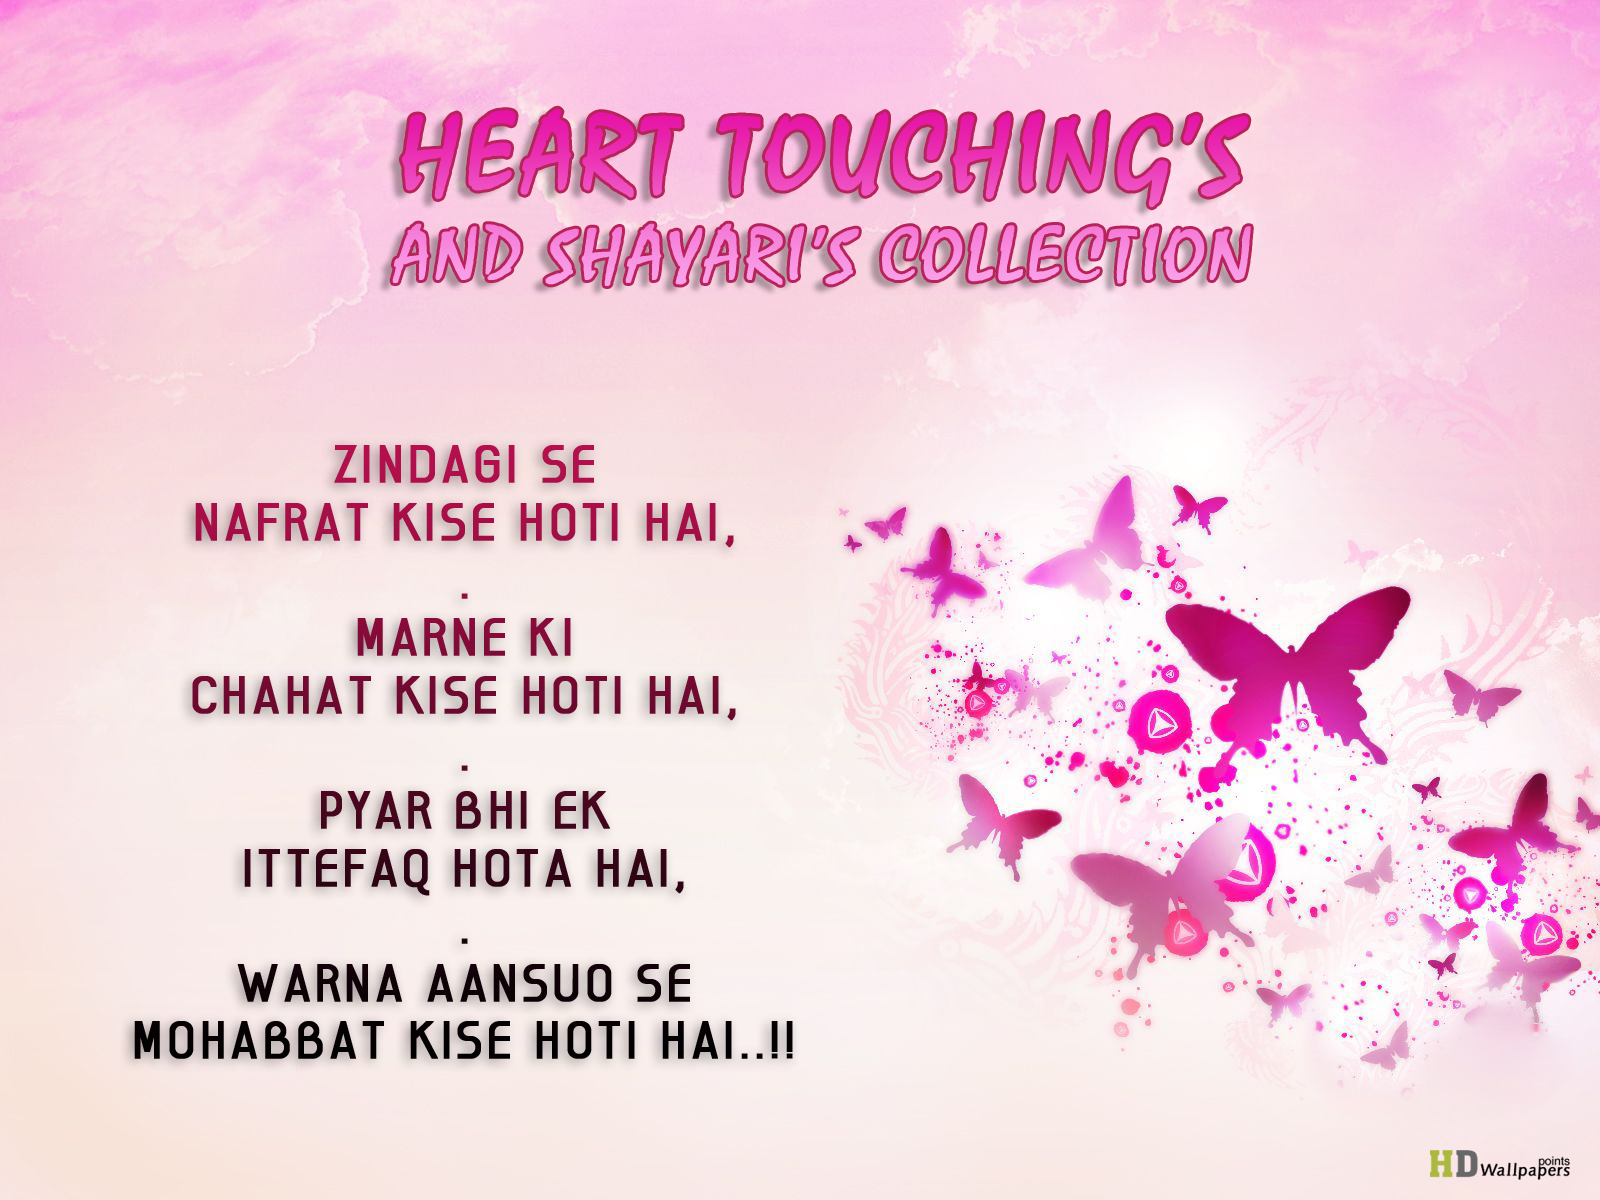 heart touching wallpaper with quotes,text,font,pink,magenta,graphic design